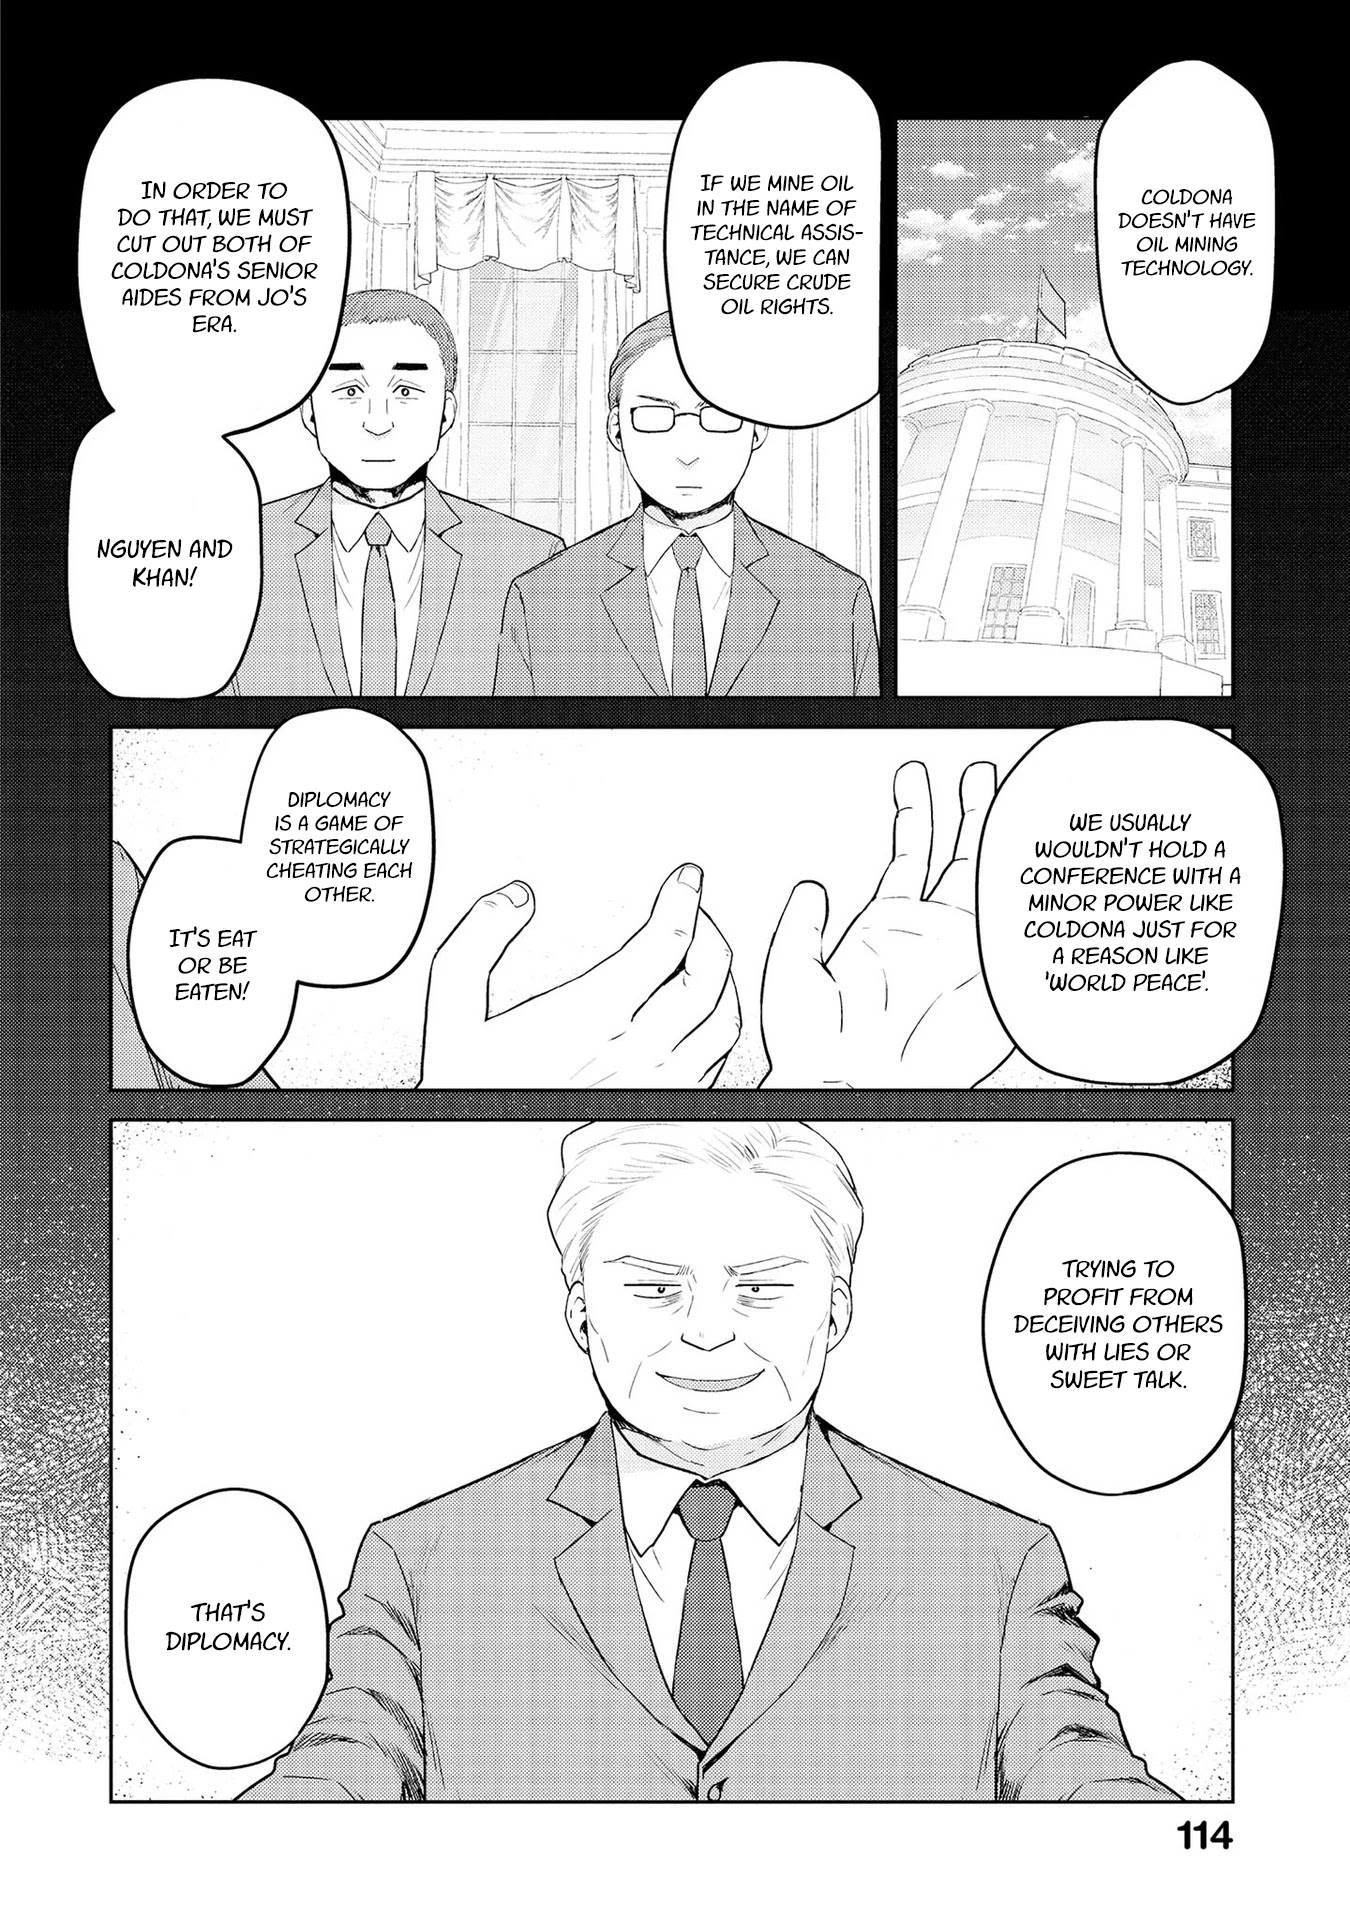 Oh, Our General Myao - Page 2